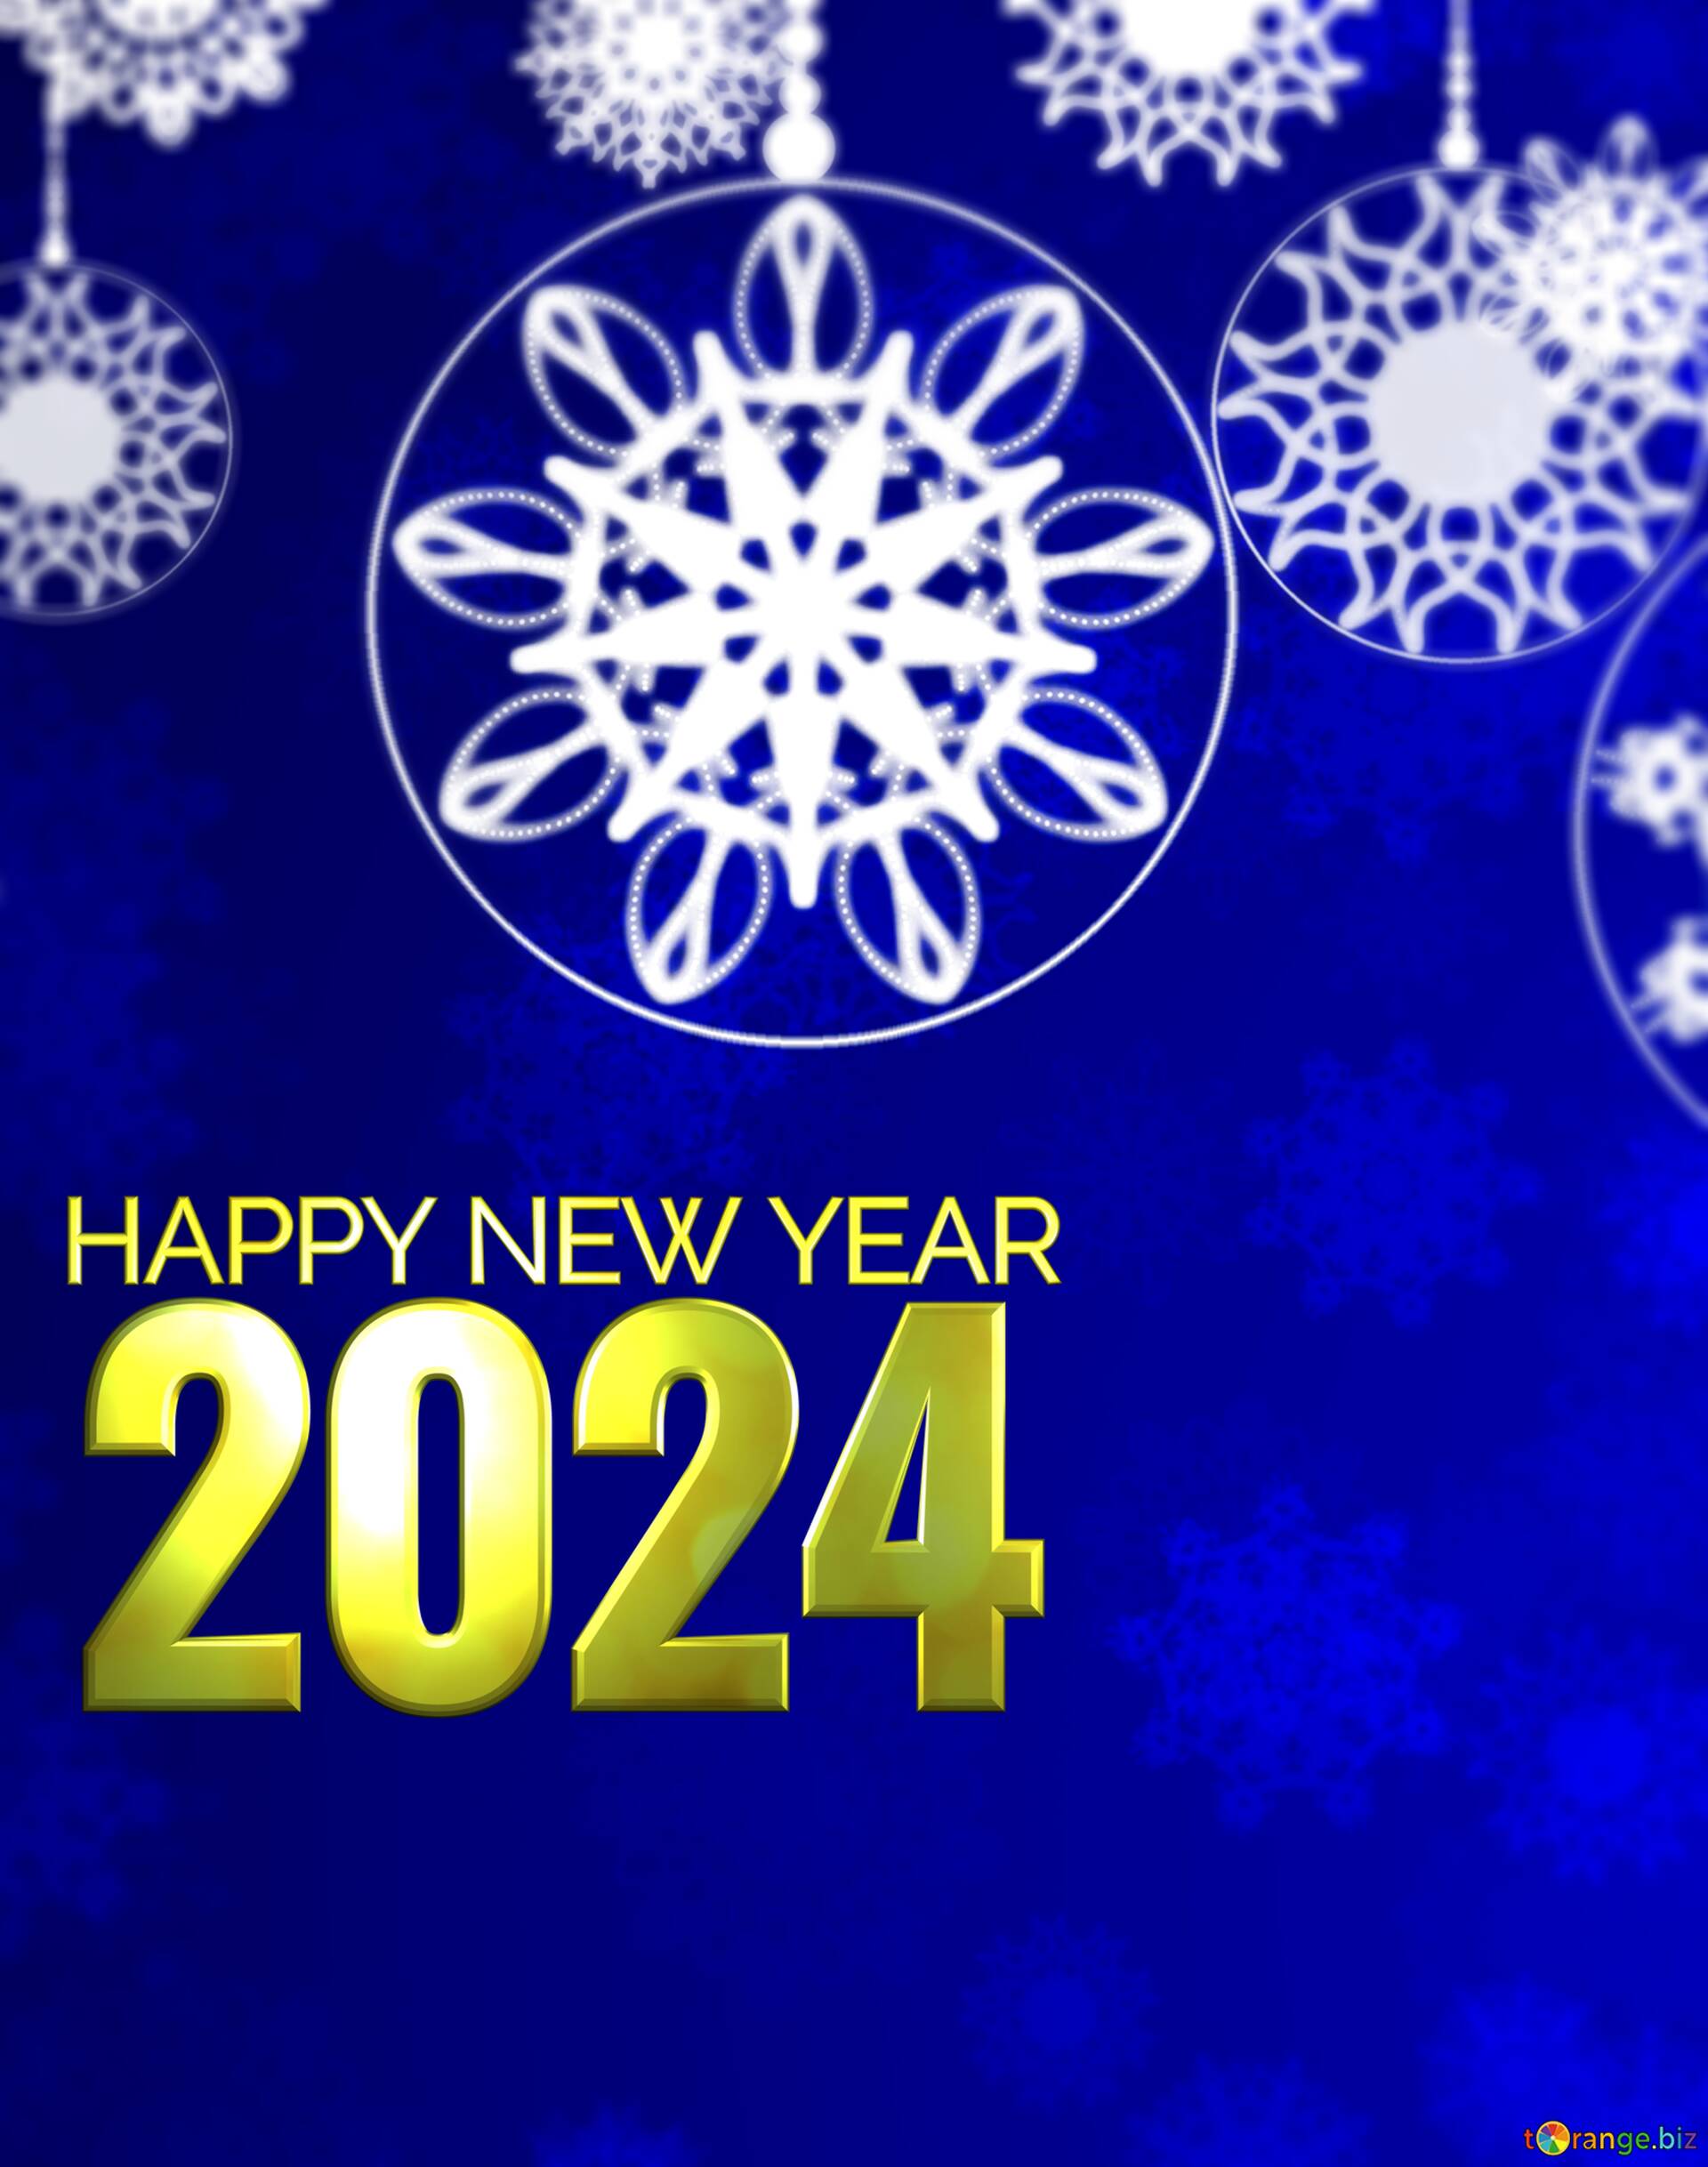 Download Free Picture Happy New Year 2023 Clipart On Cc By License Free Image Stock Torange Biz Fx 198334